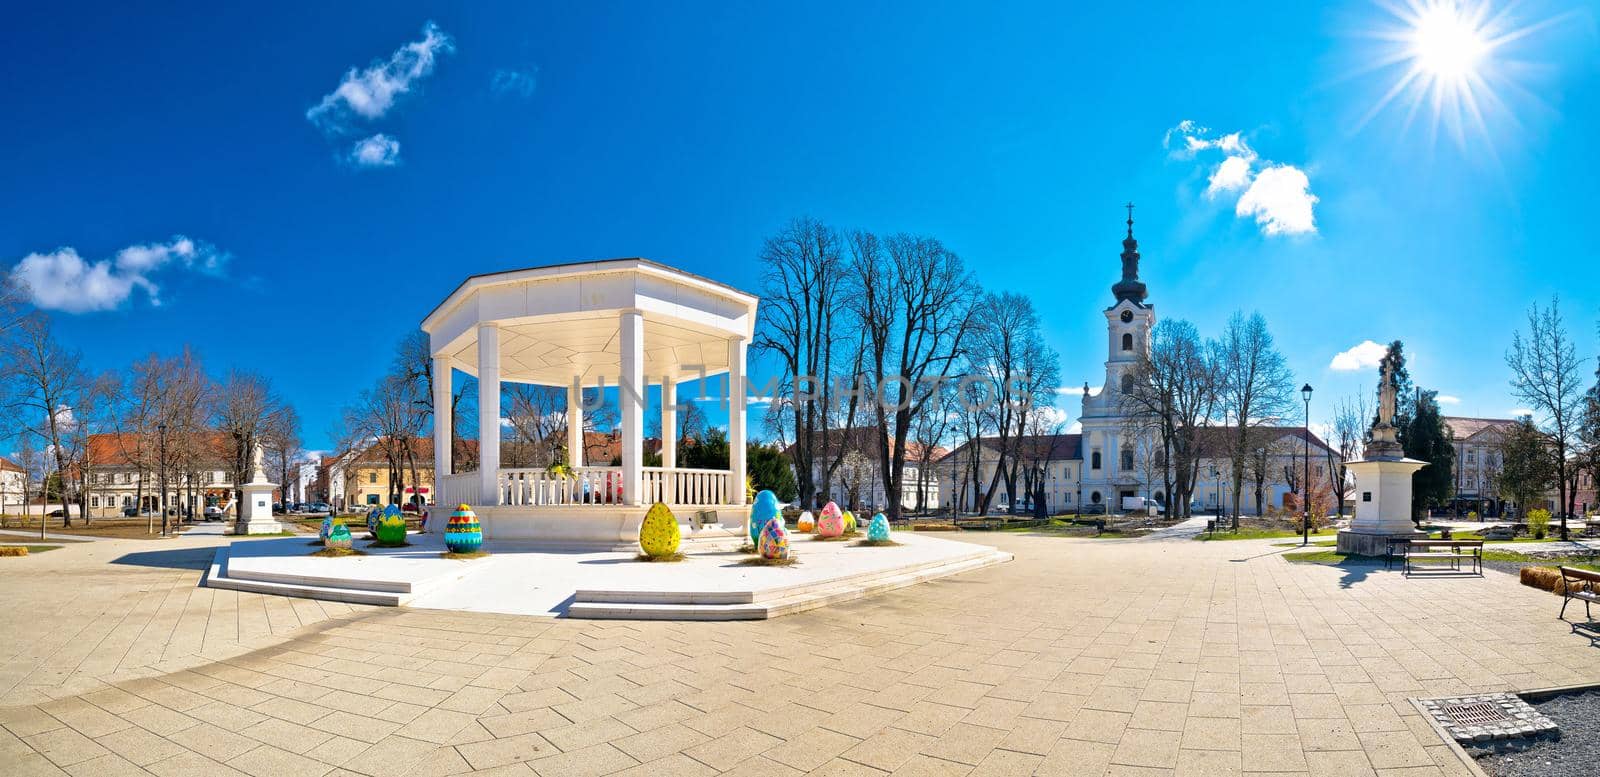 Town of Bjelovar central square springtime panoramic view by xbrchx